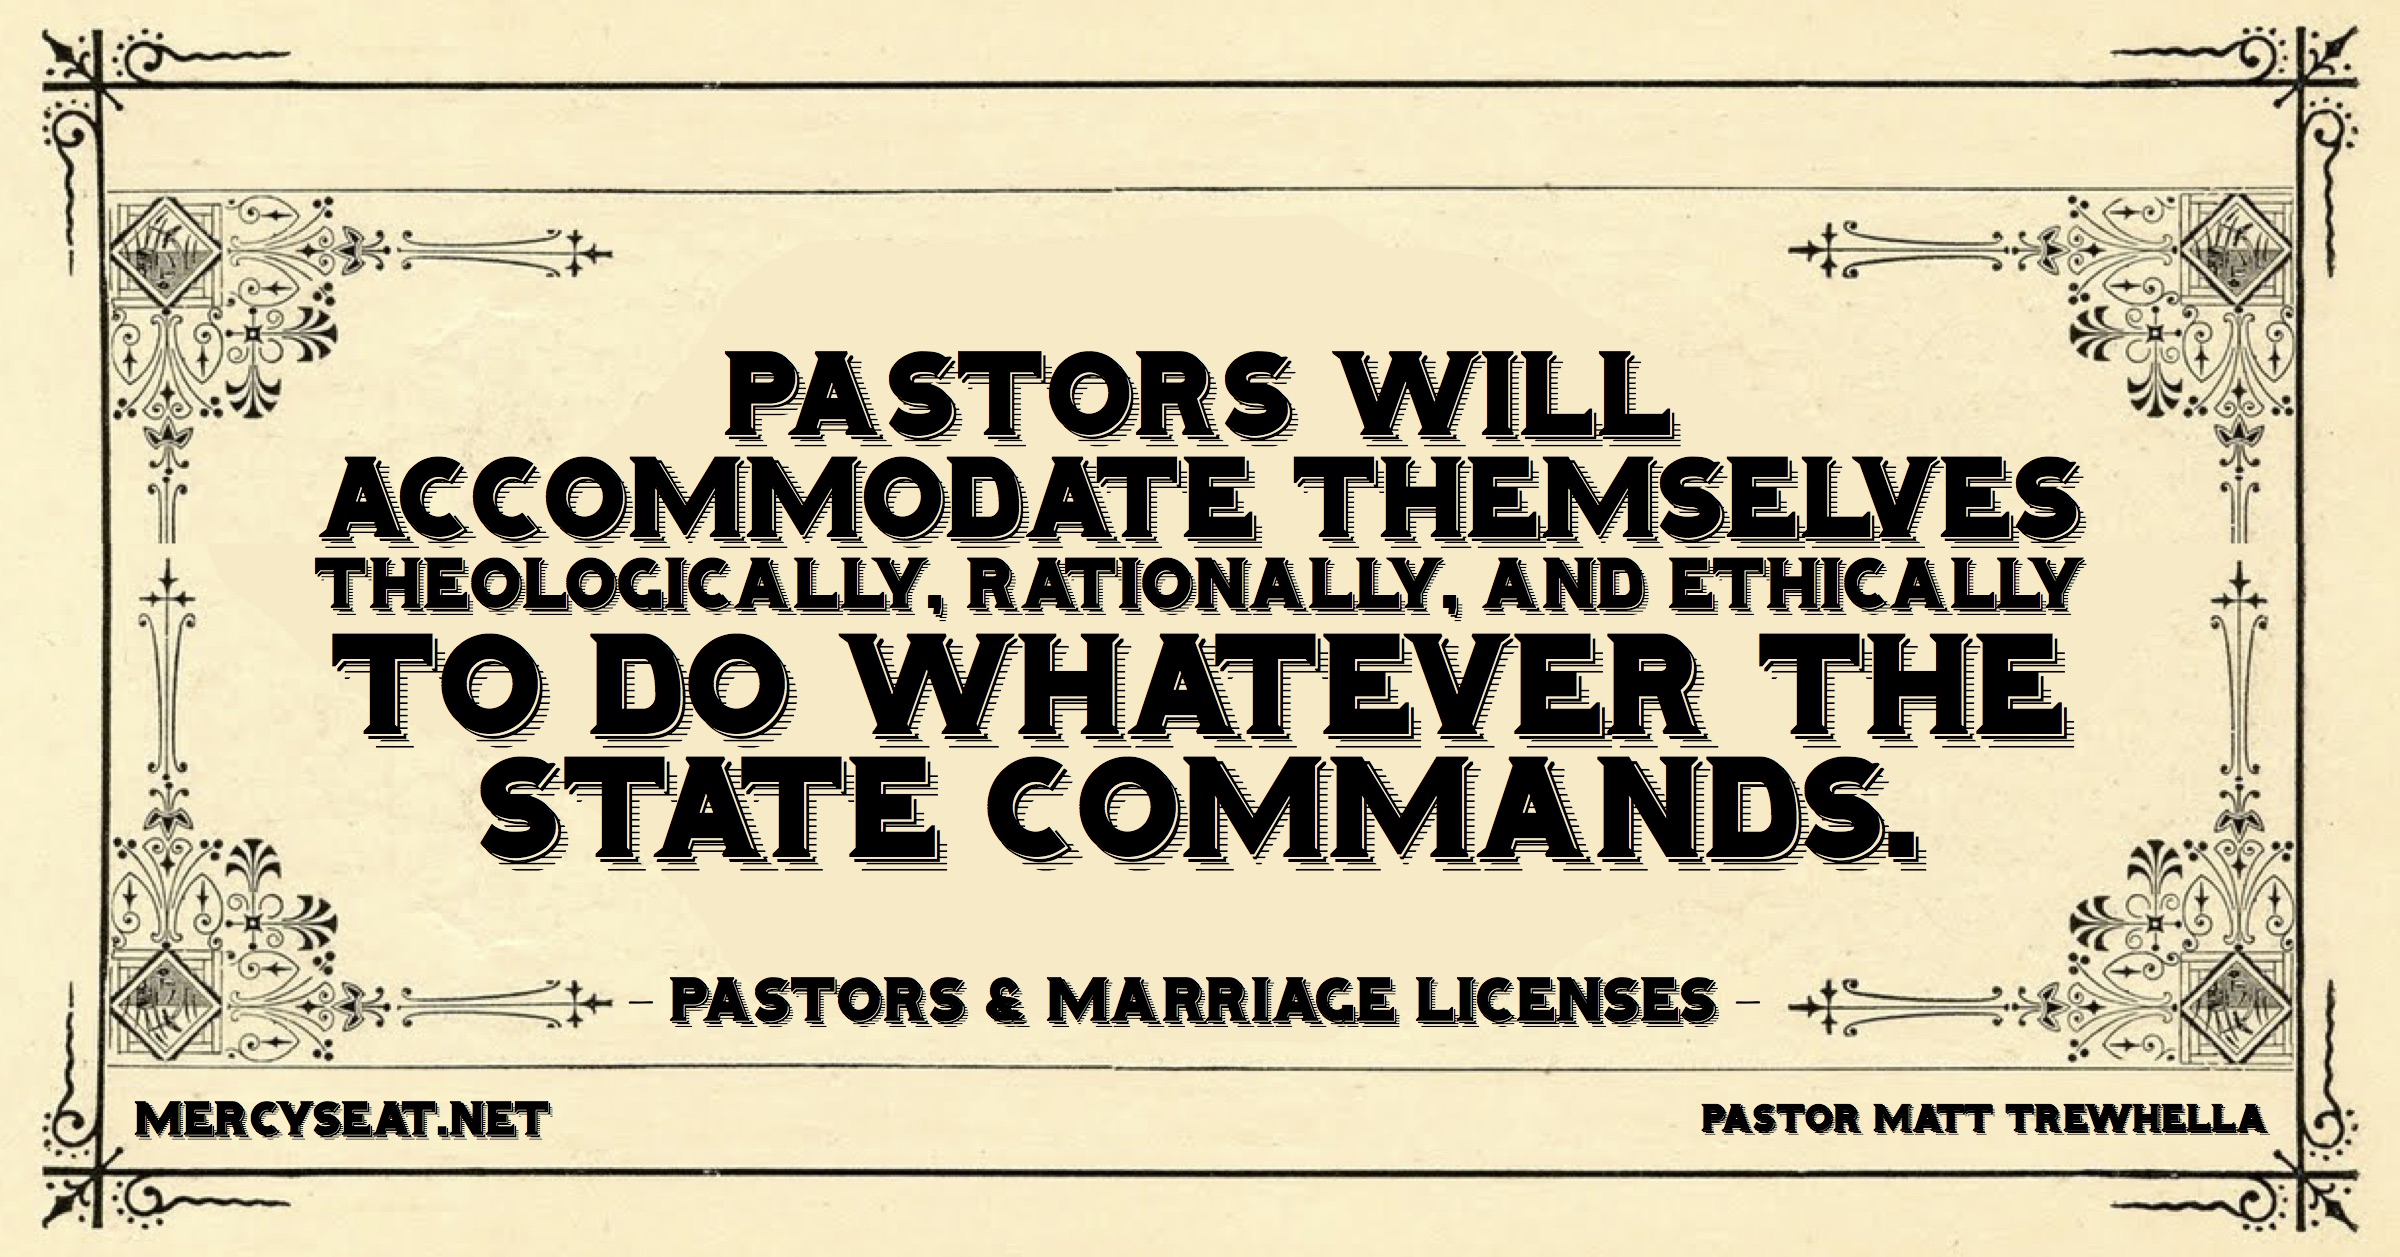 Pastors and marriage licenses